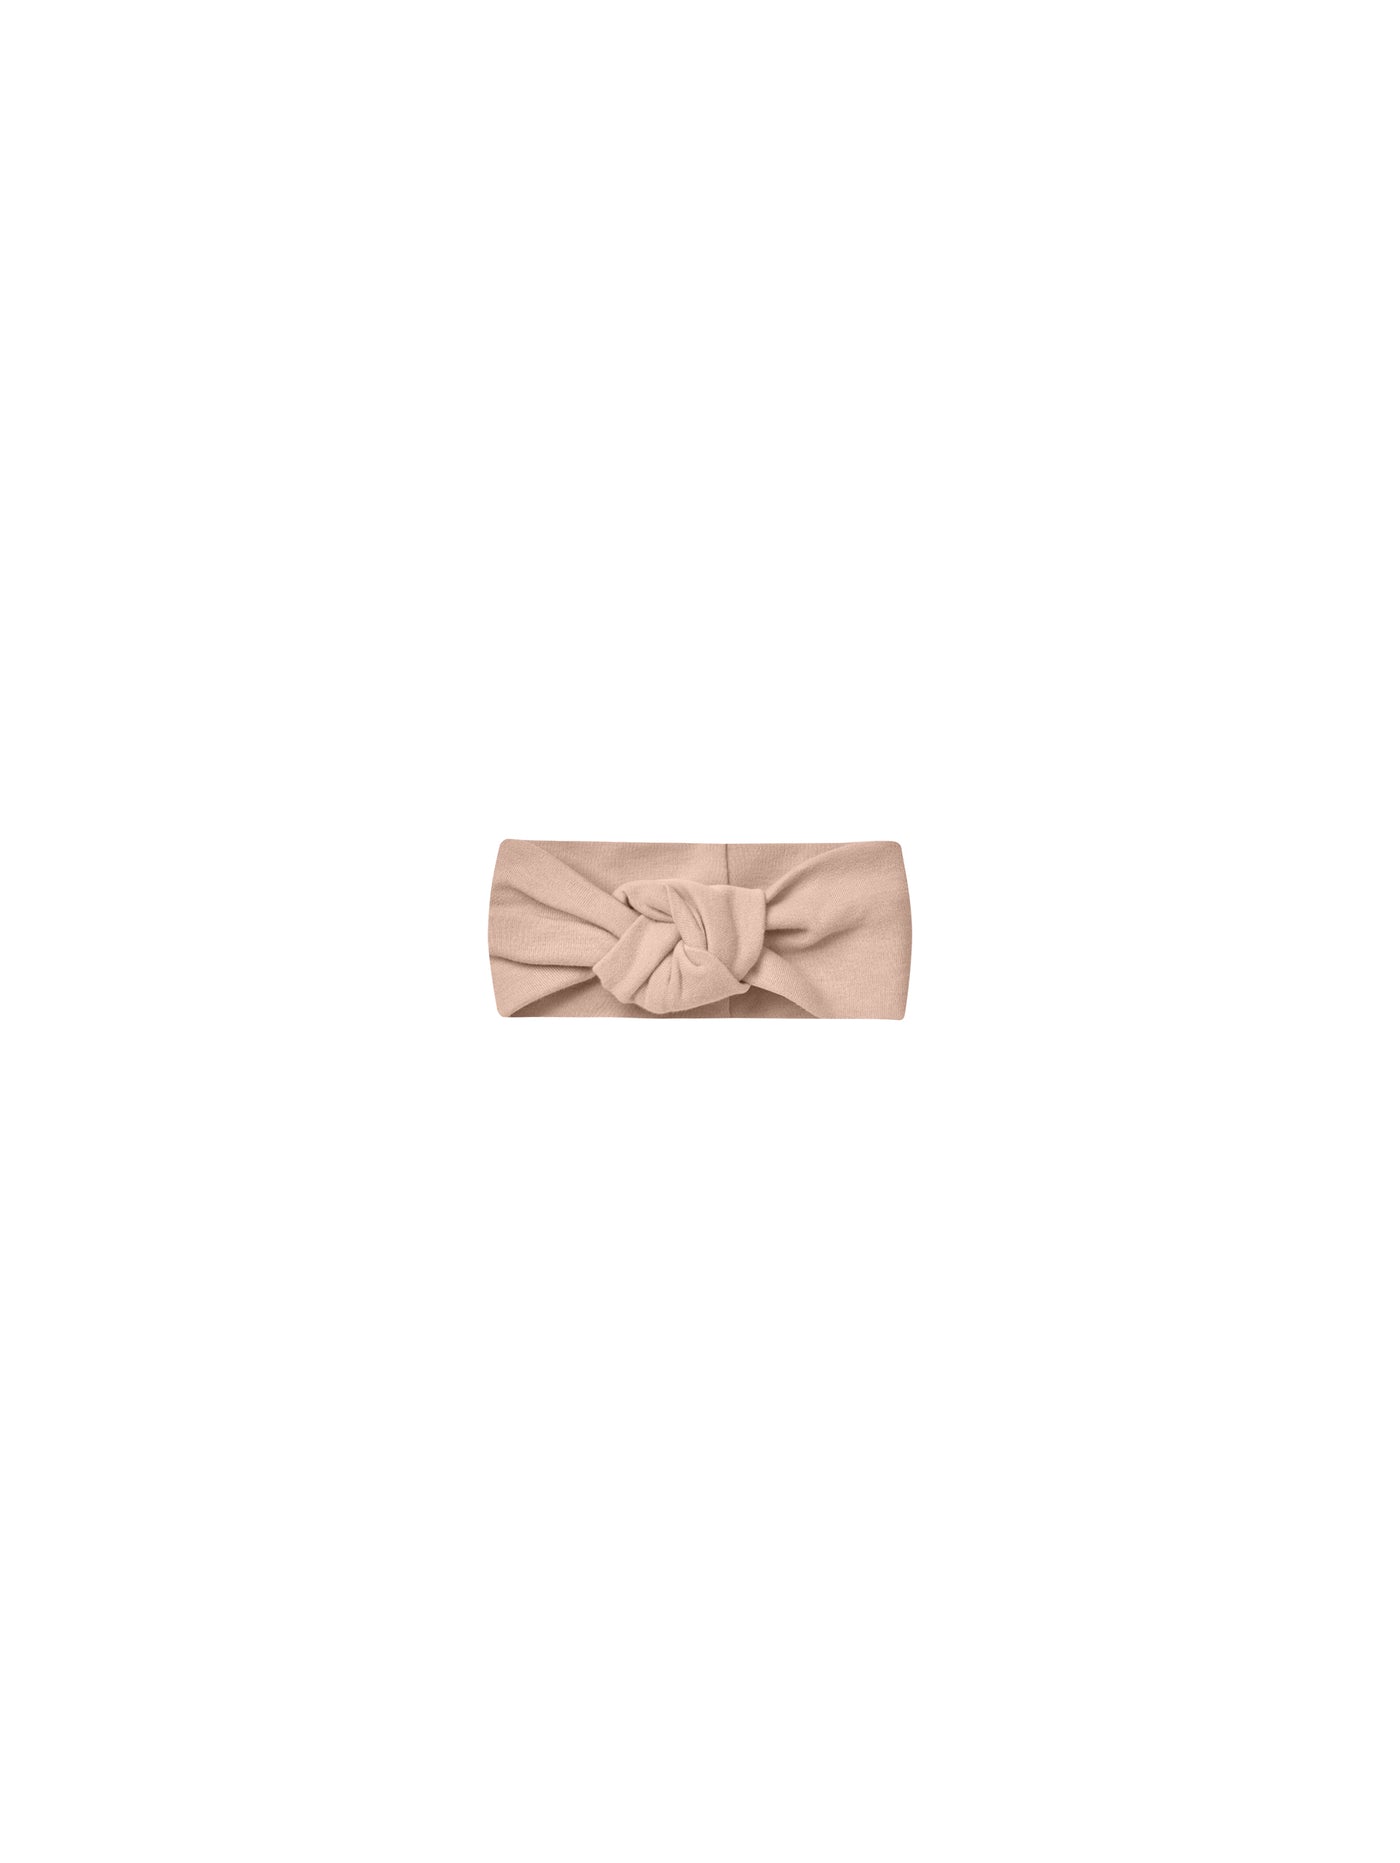 Knotted Headband in Blush